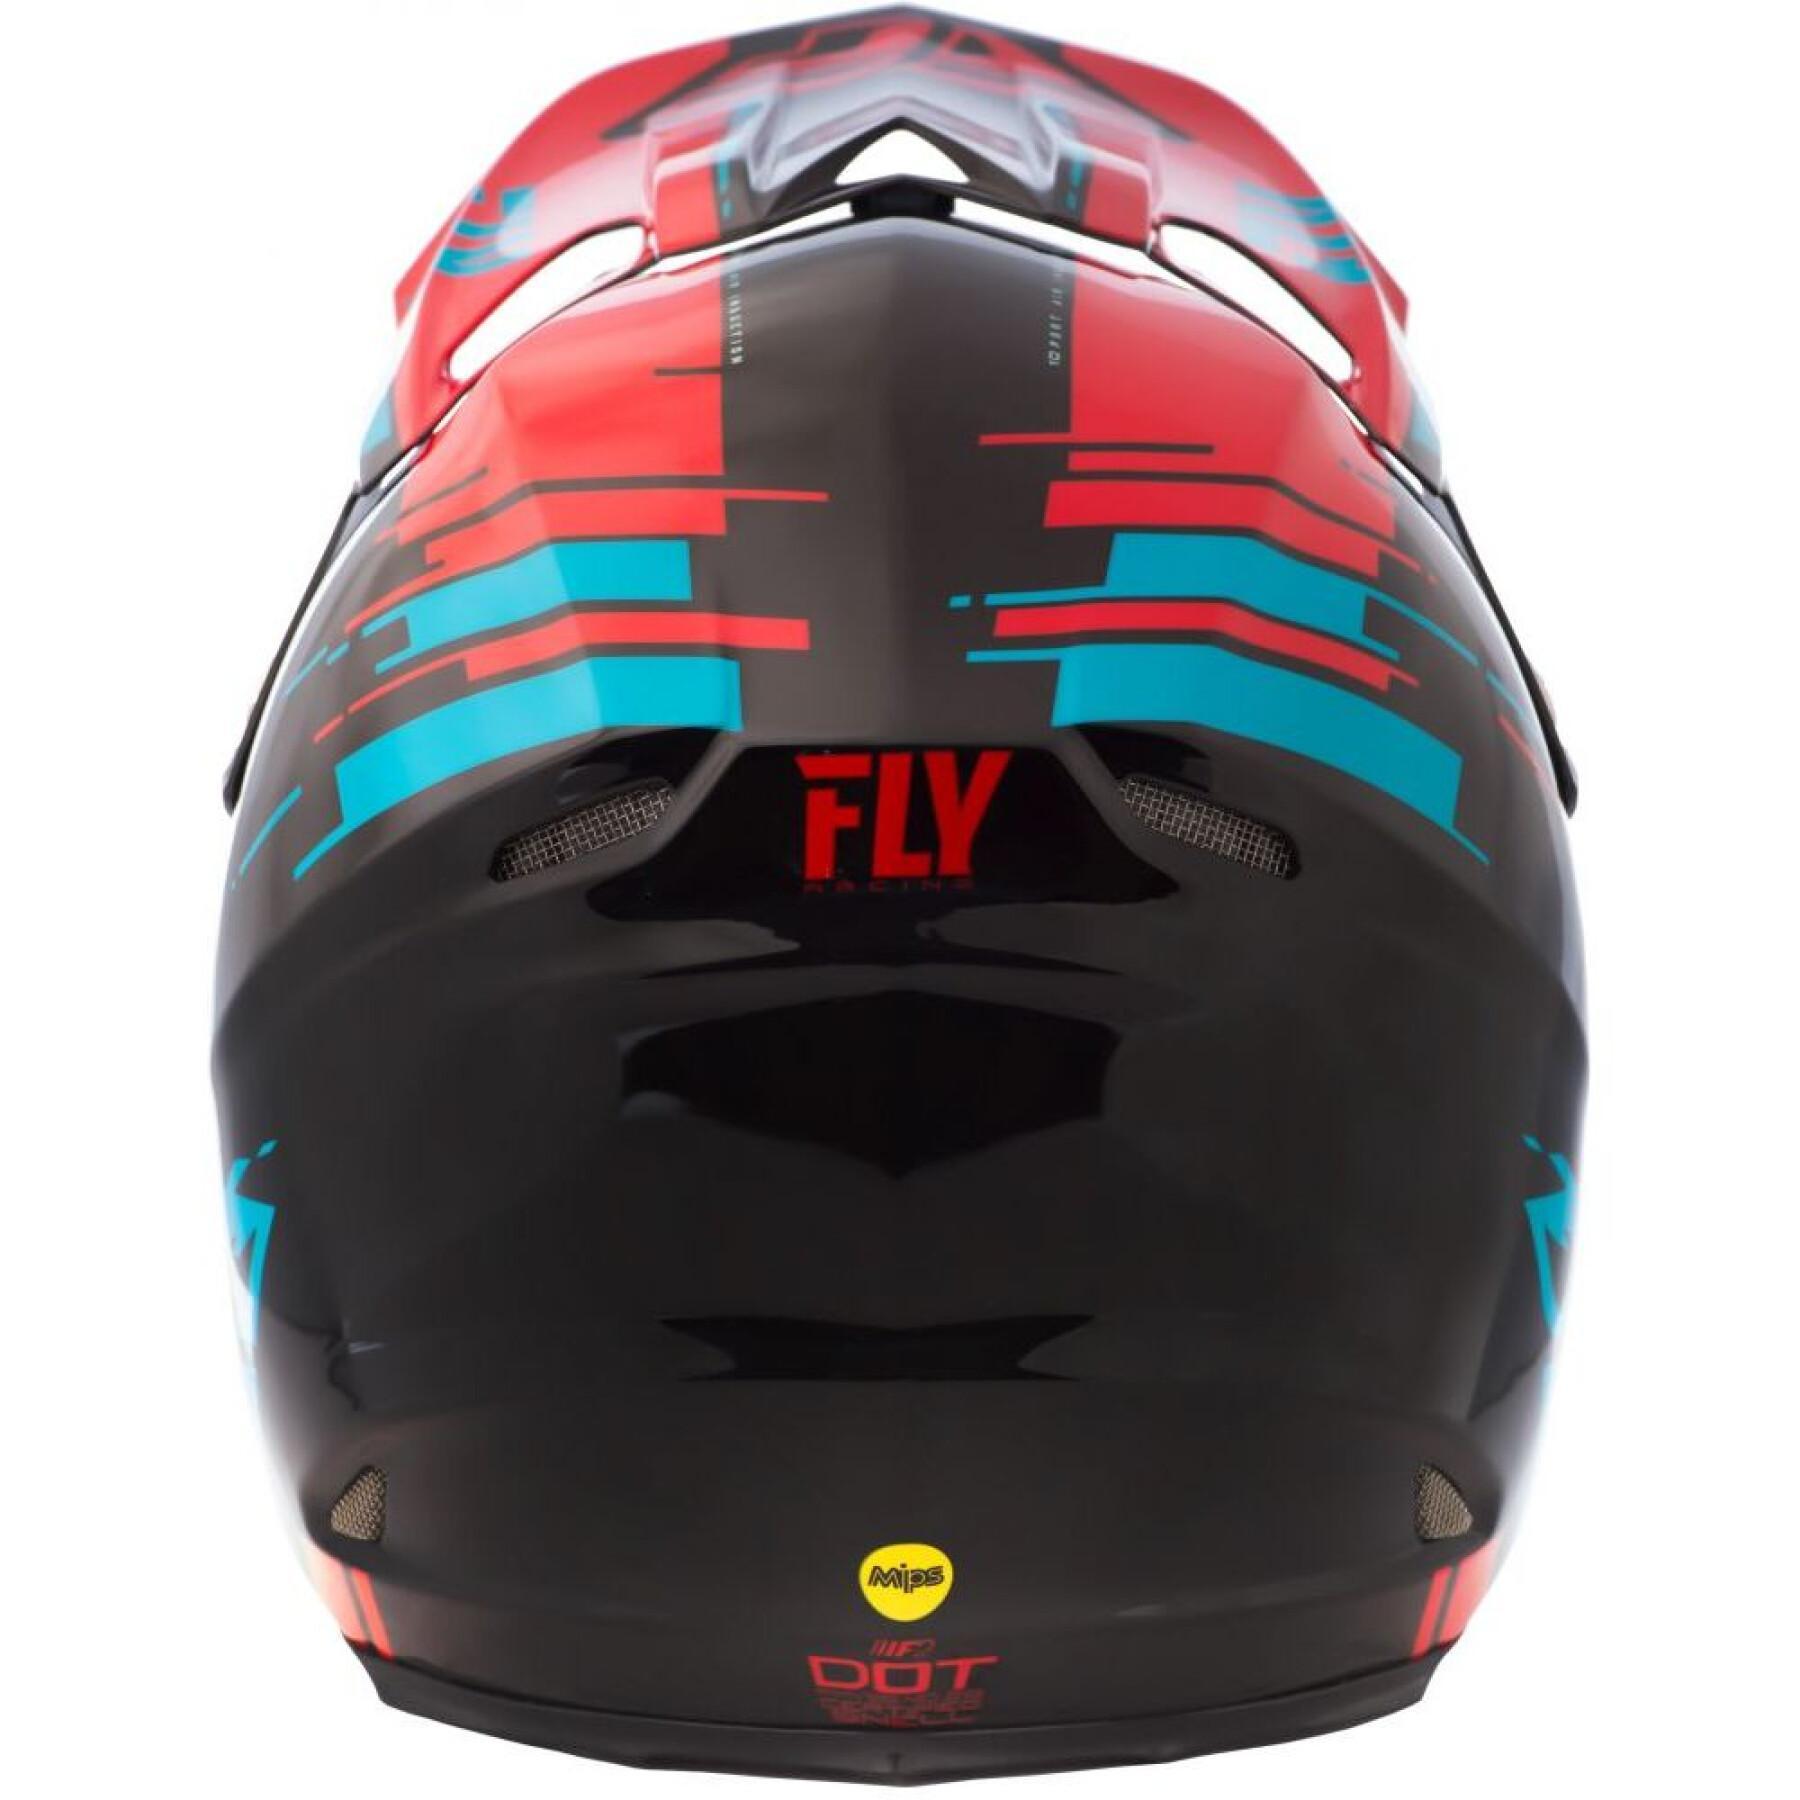 Casco da moto Fly Racing F2 Carbon 2018 Forge Mips